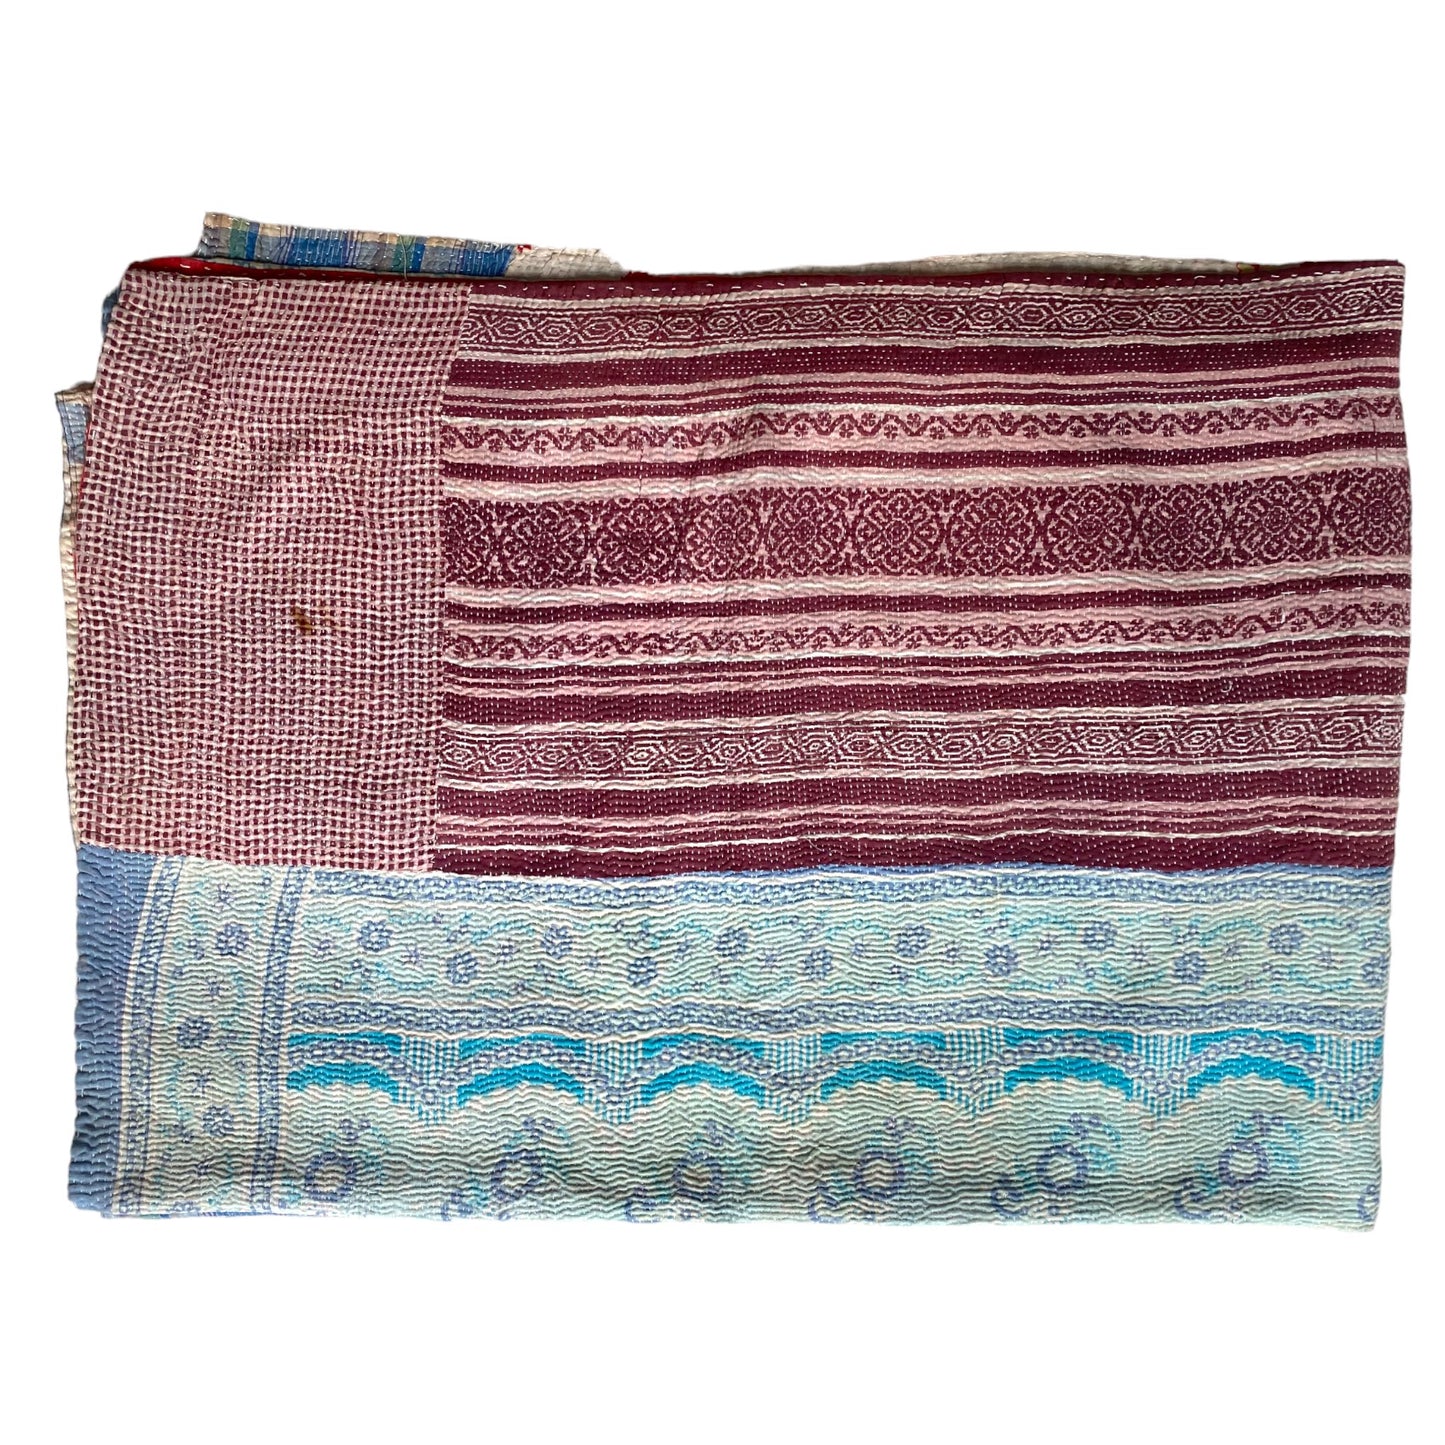 Red and white Kantha quilt reverse